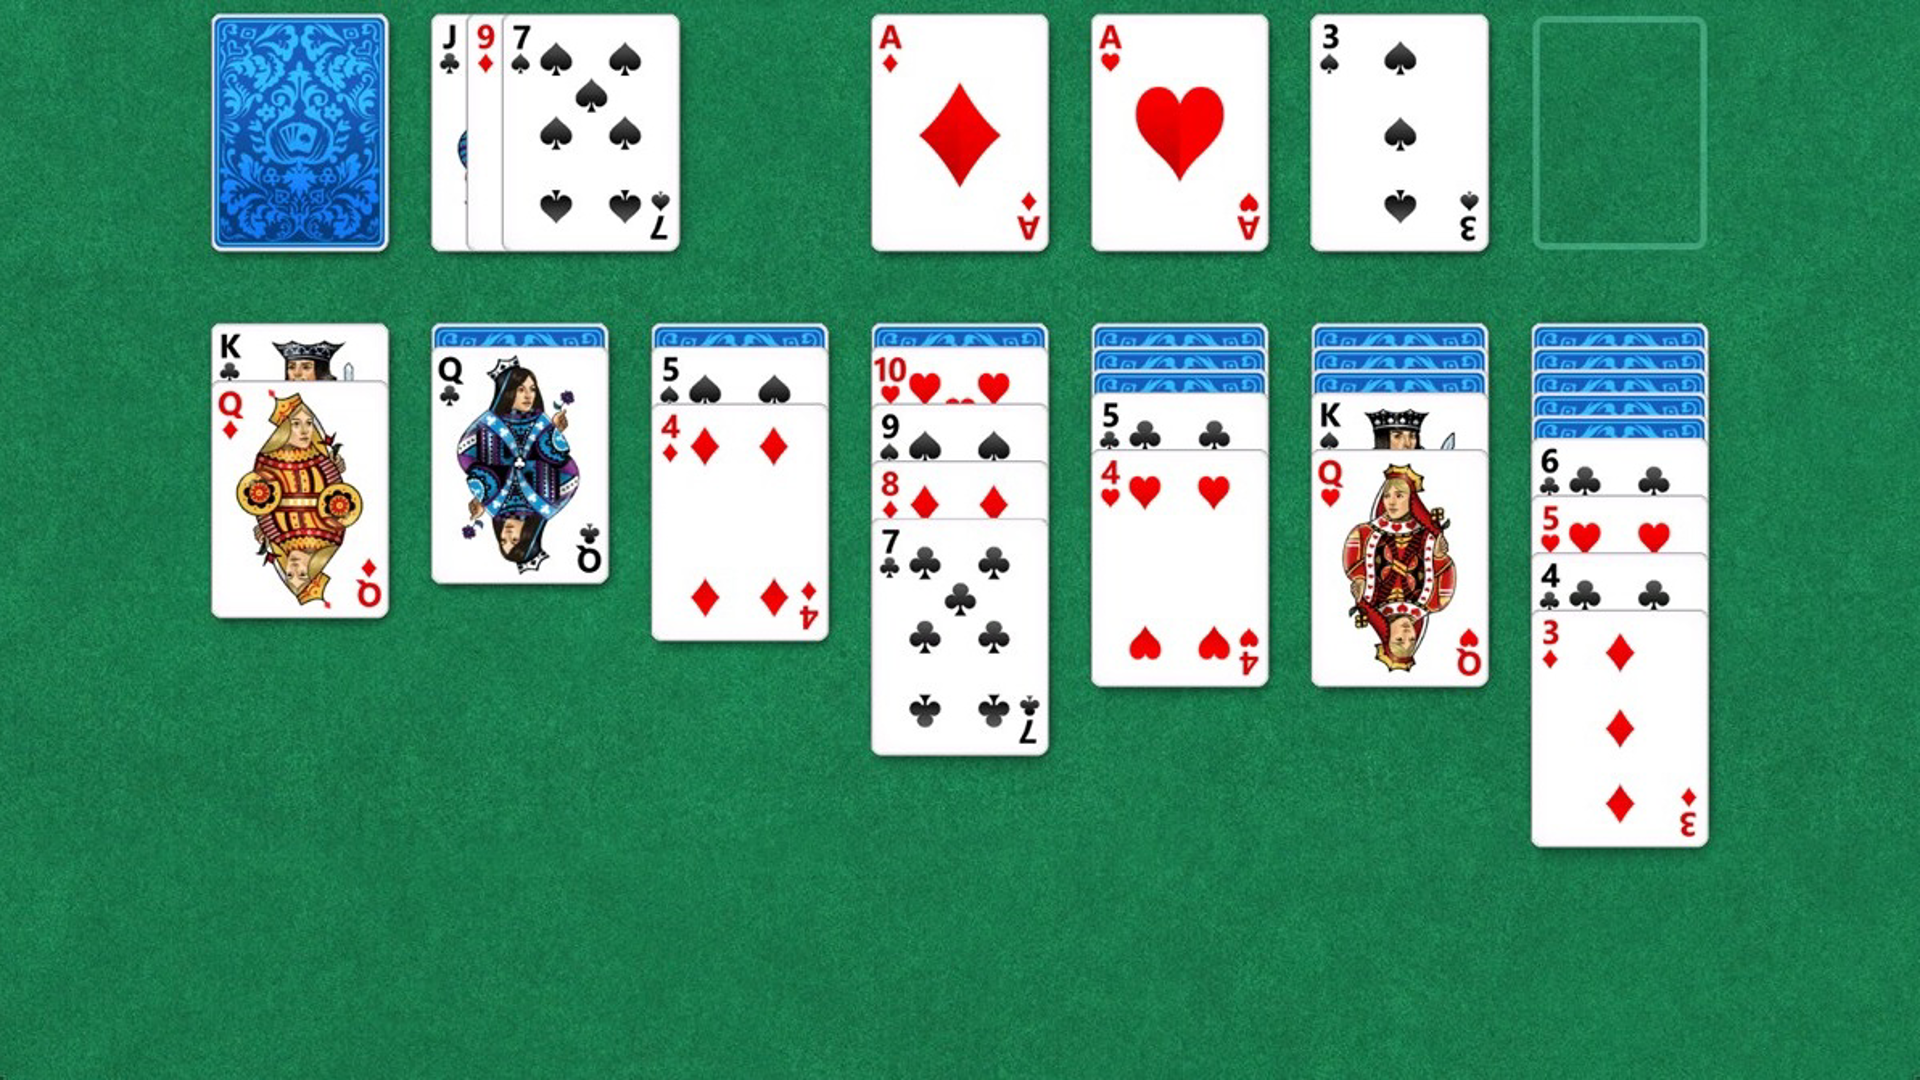 freecell solitaire free download windows 10